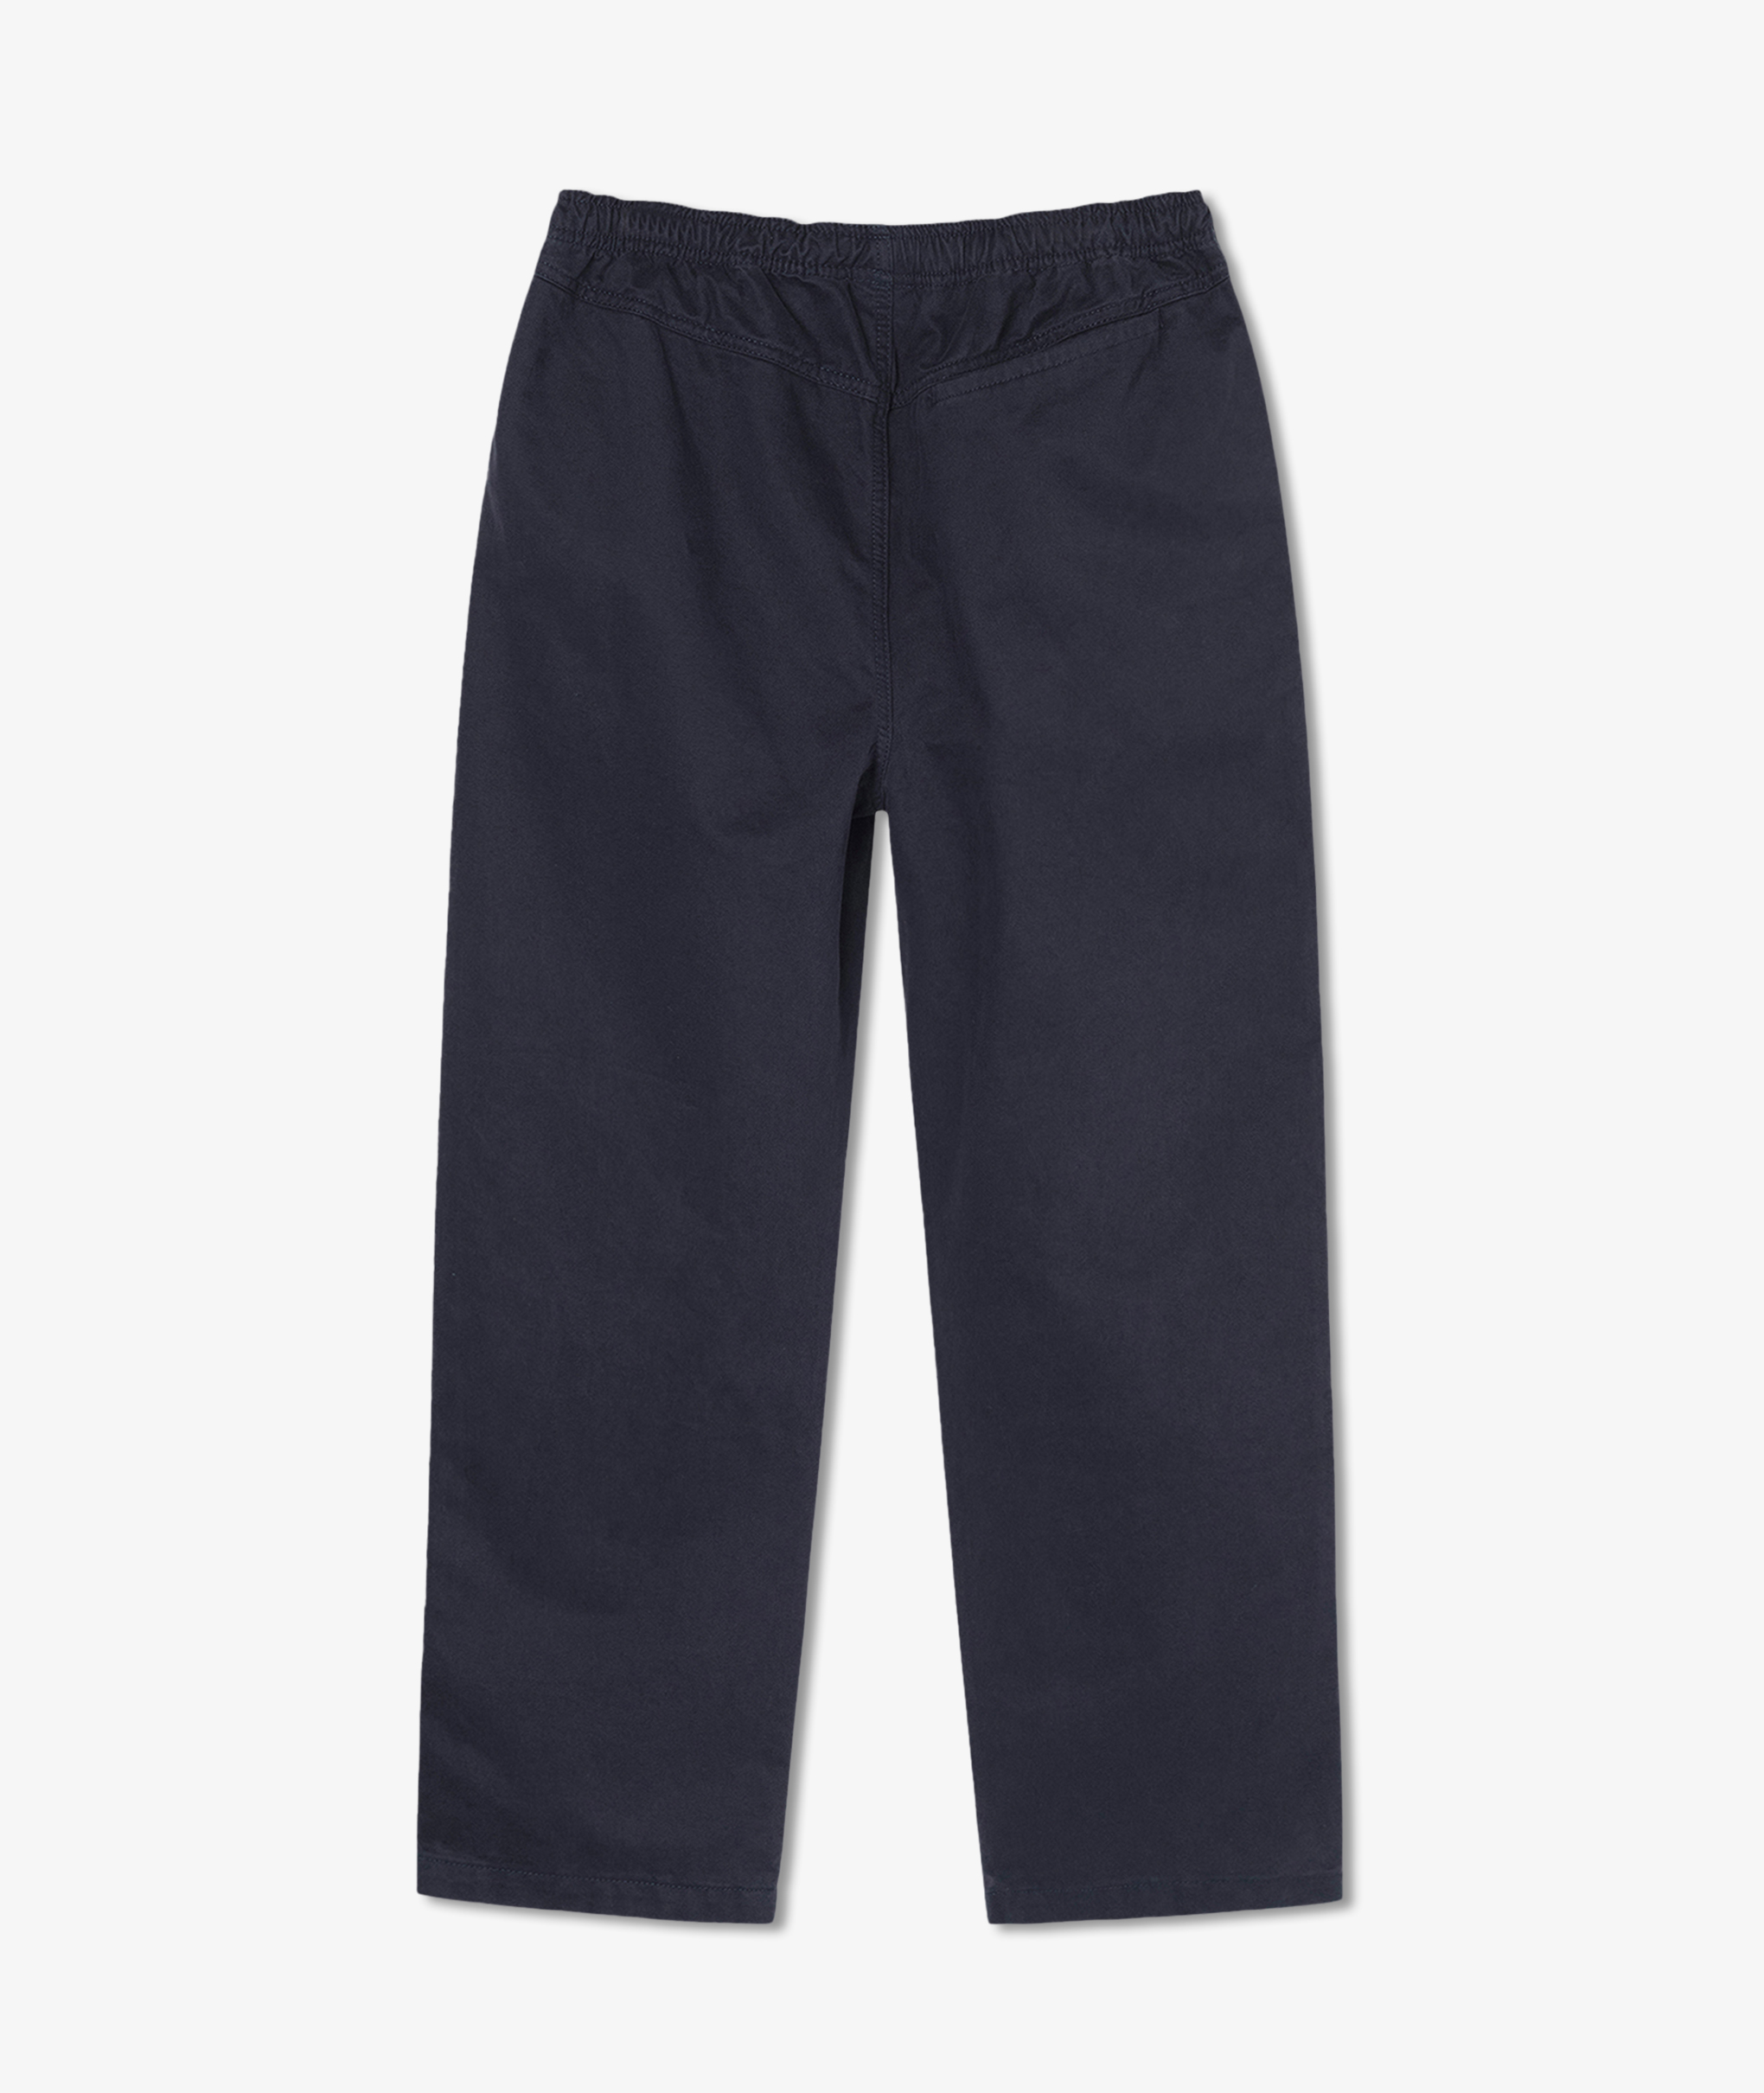 Norse Store  Shipping Worldwide - Stüssy Brushed Beach Pant - Navy